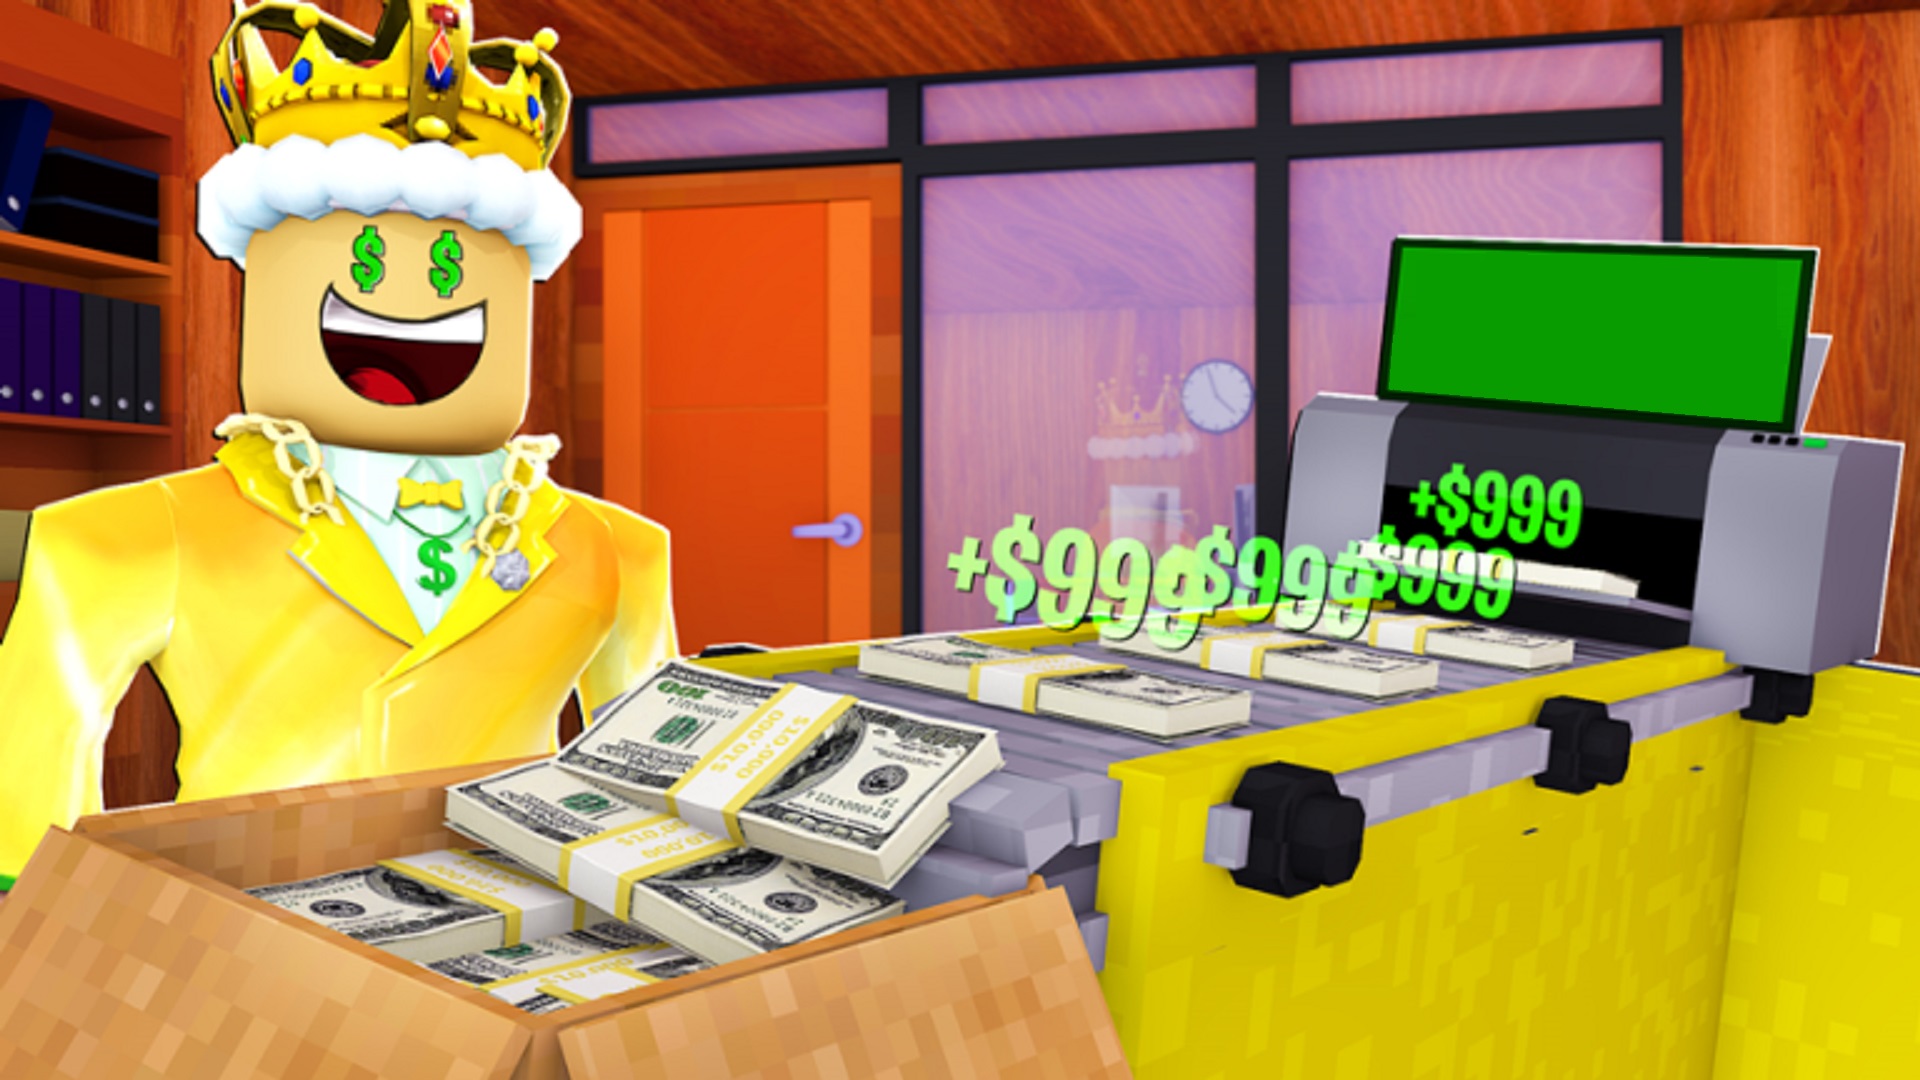 Millionaire Empire Tycoon codes – free weapons, gear, and more